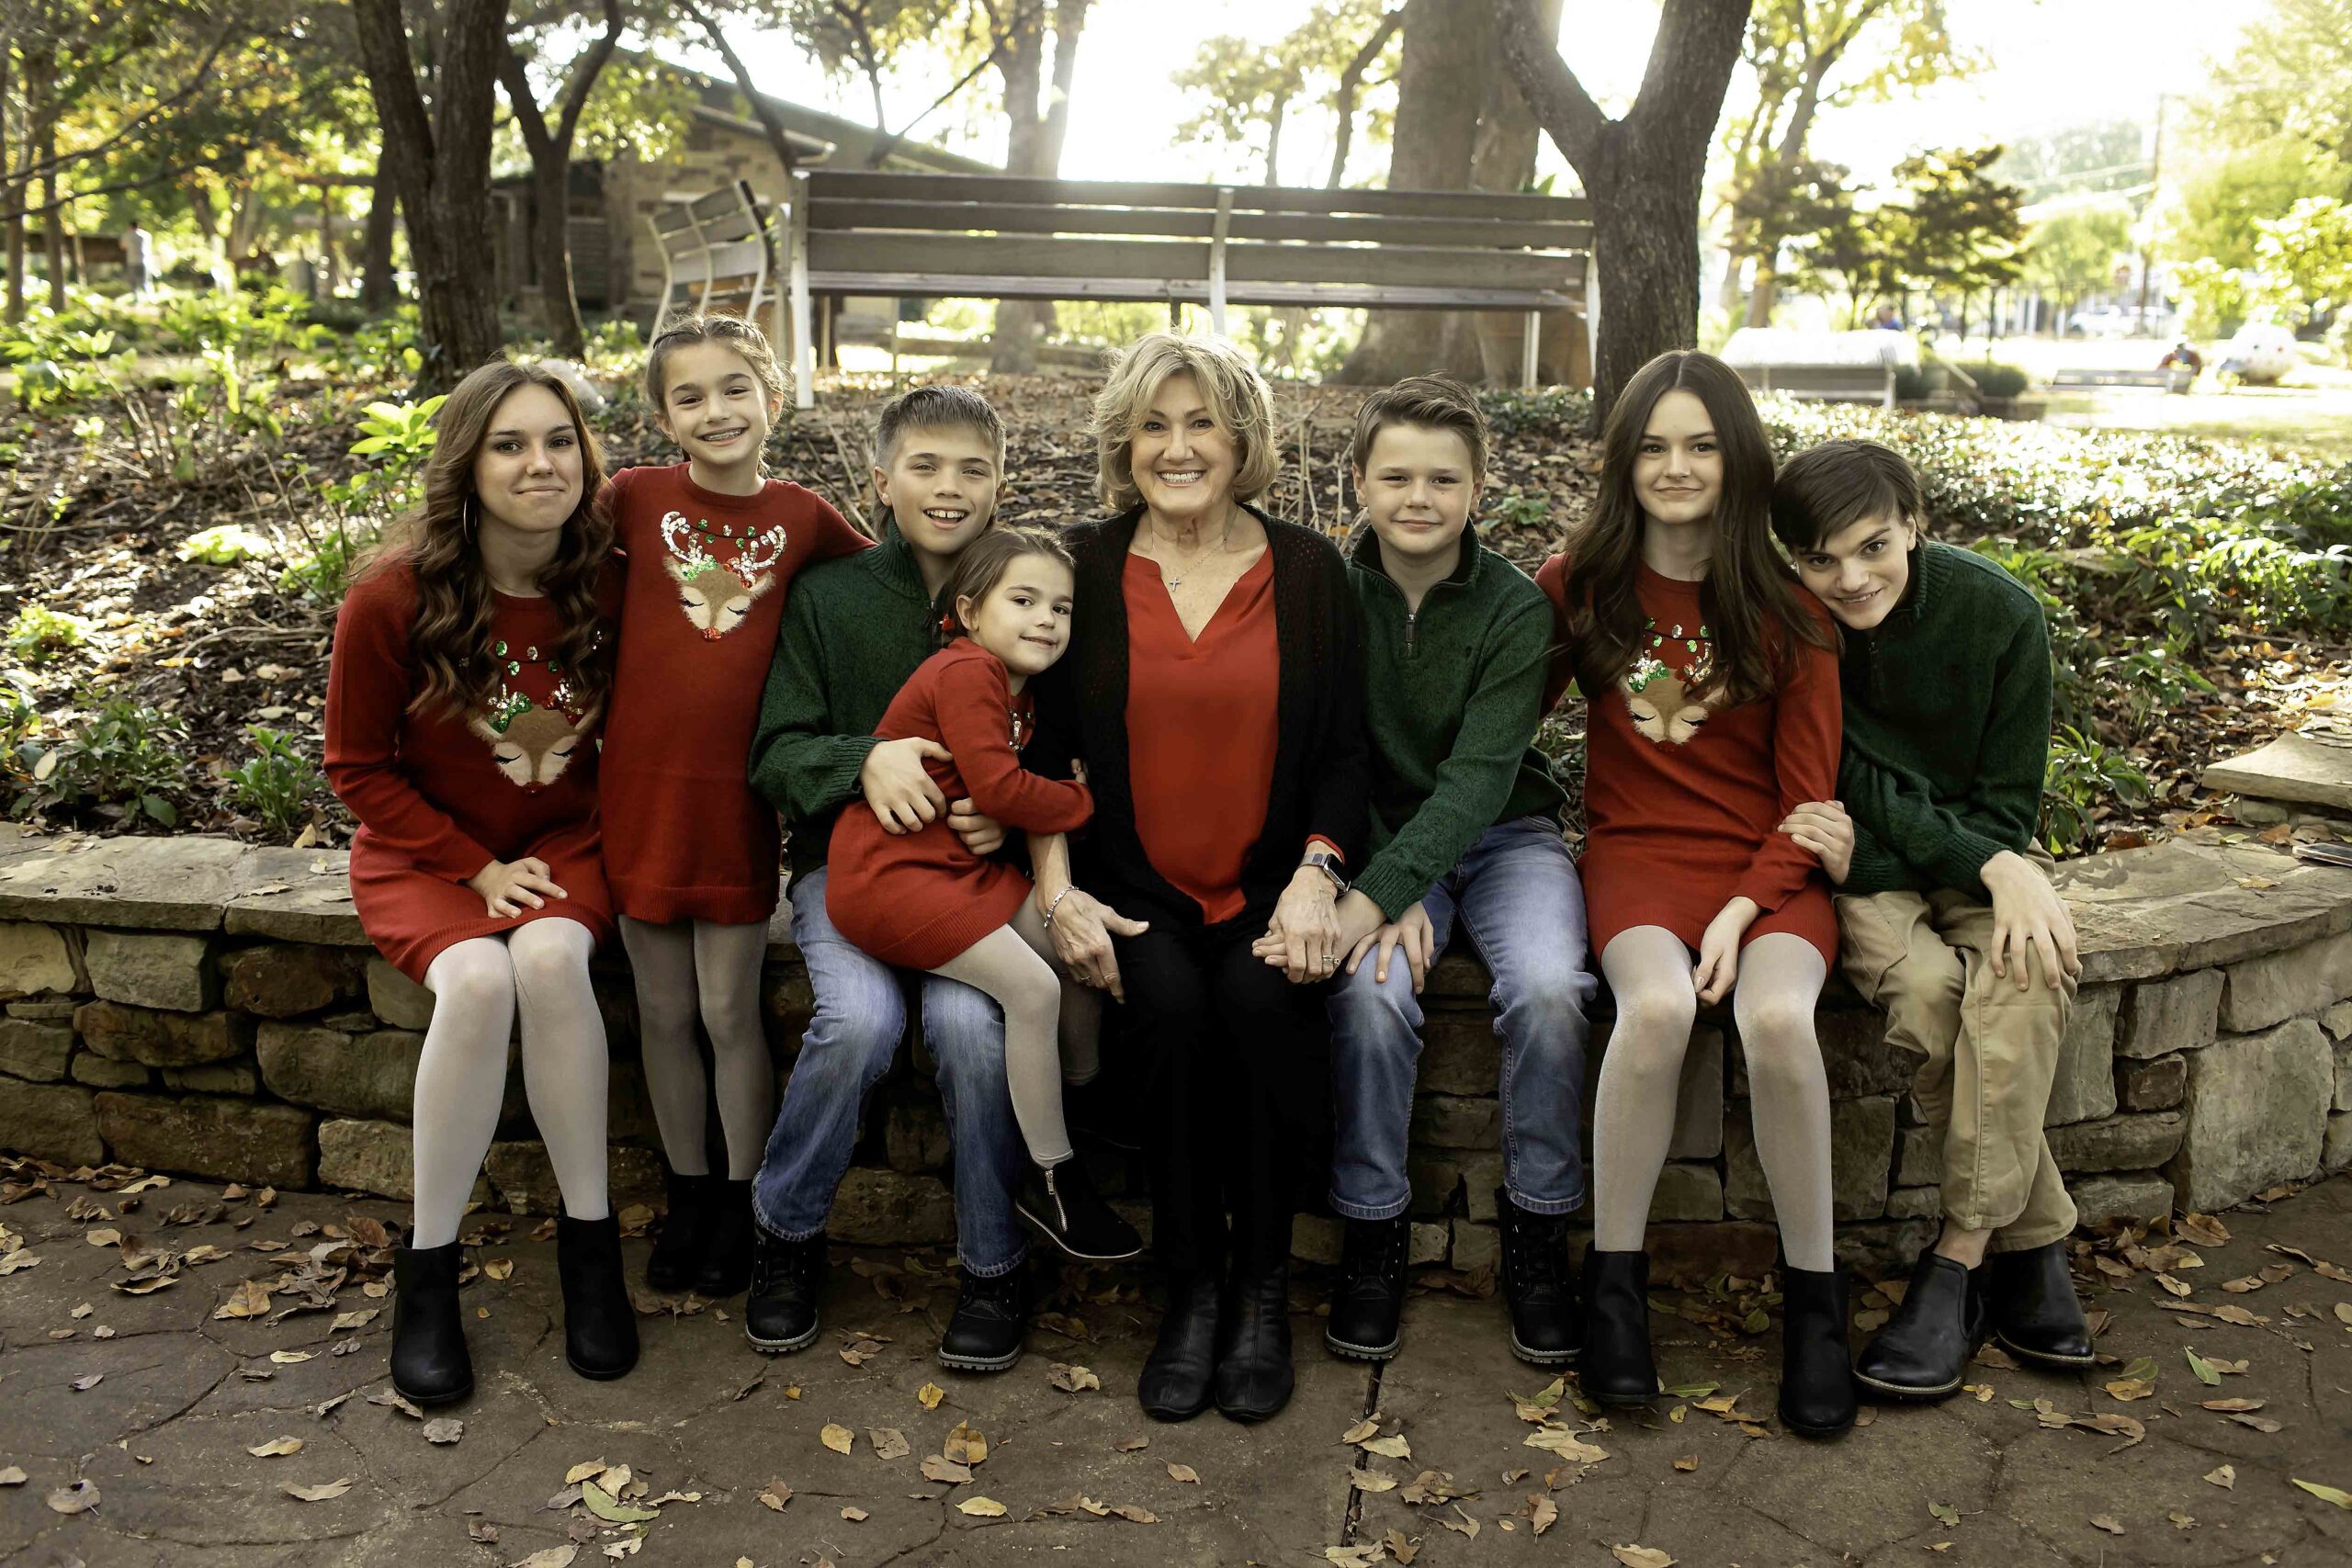 cousins and grandma portrait at park in grapevine texas